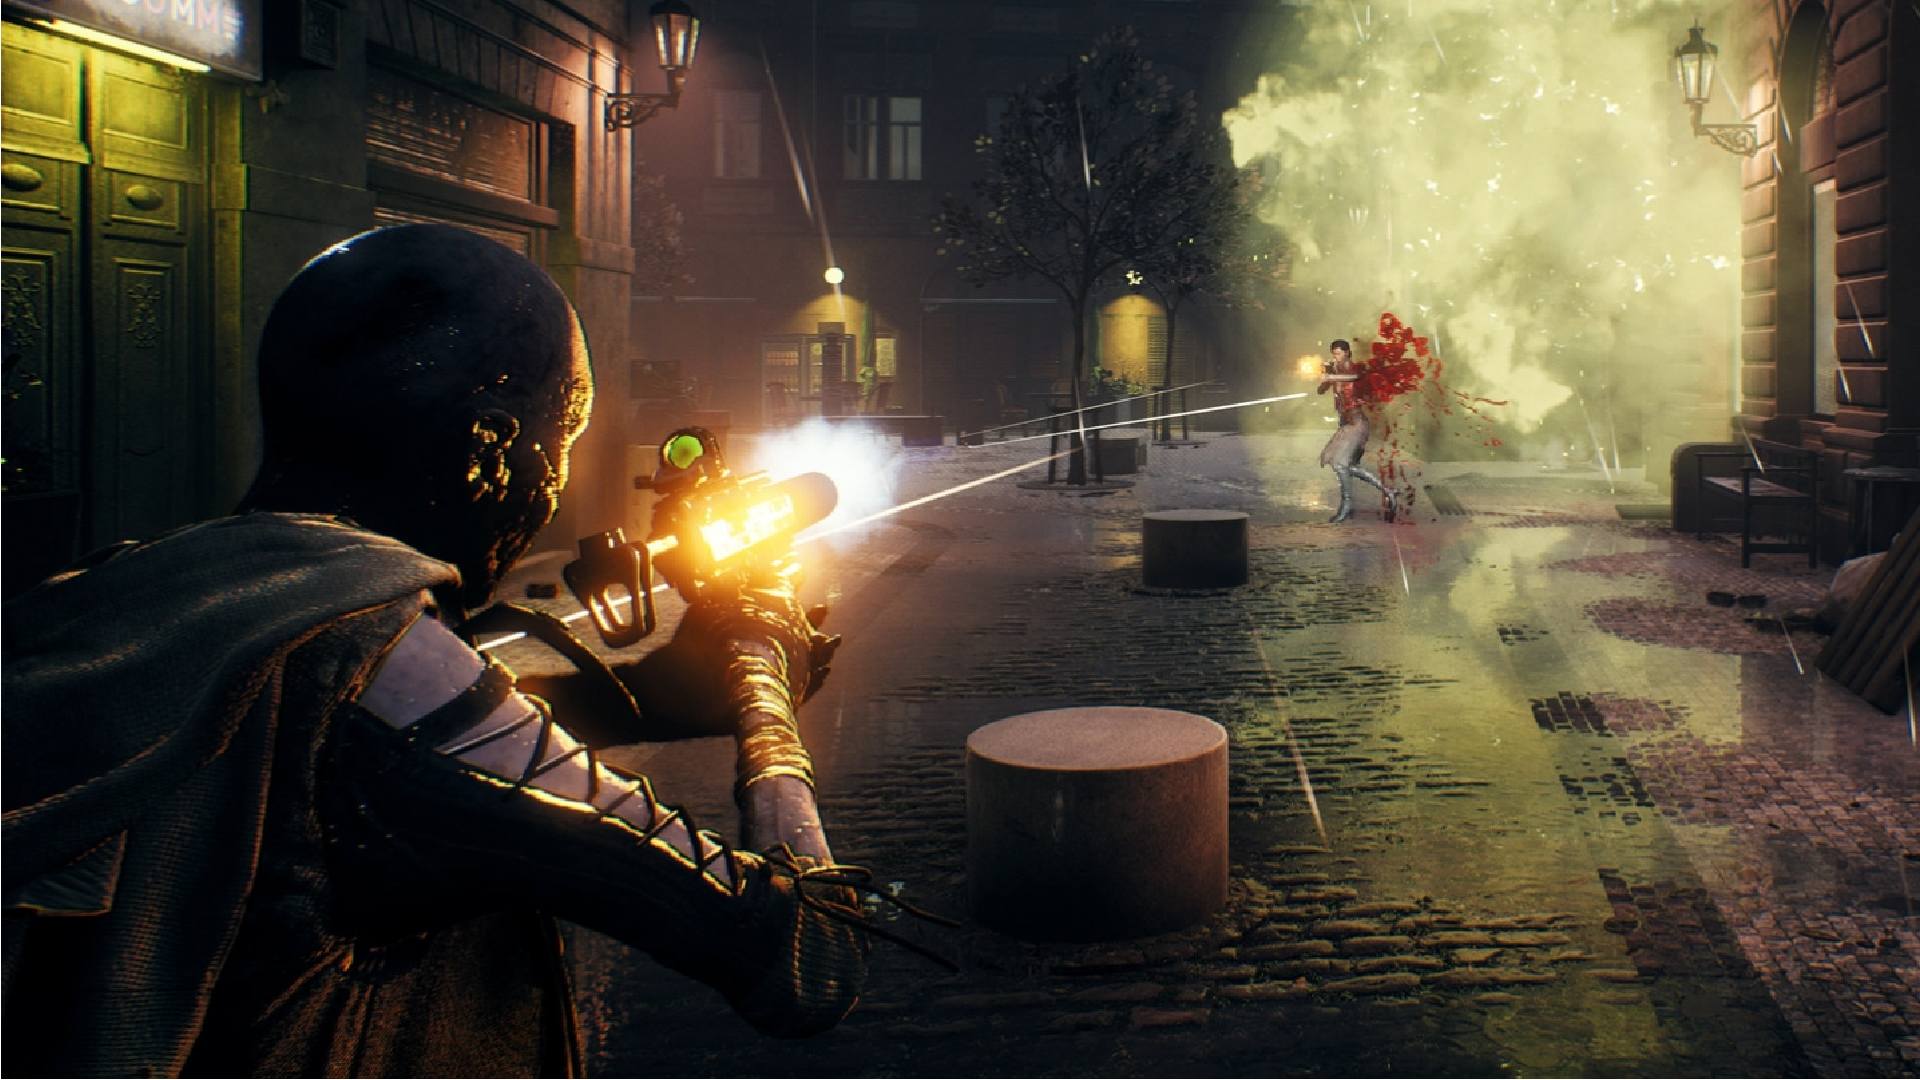 Bloodhunt PS4 release date rumours – coming to PS4? The Loadout